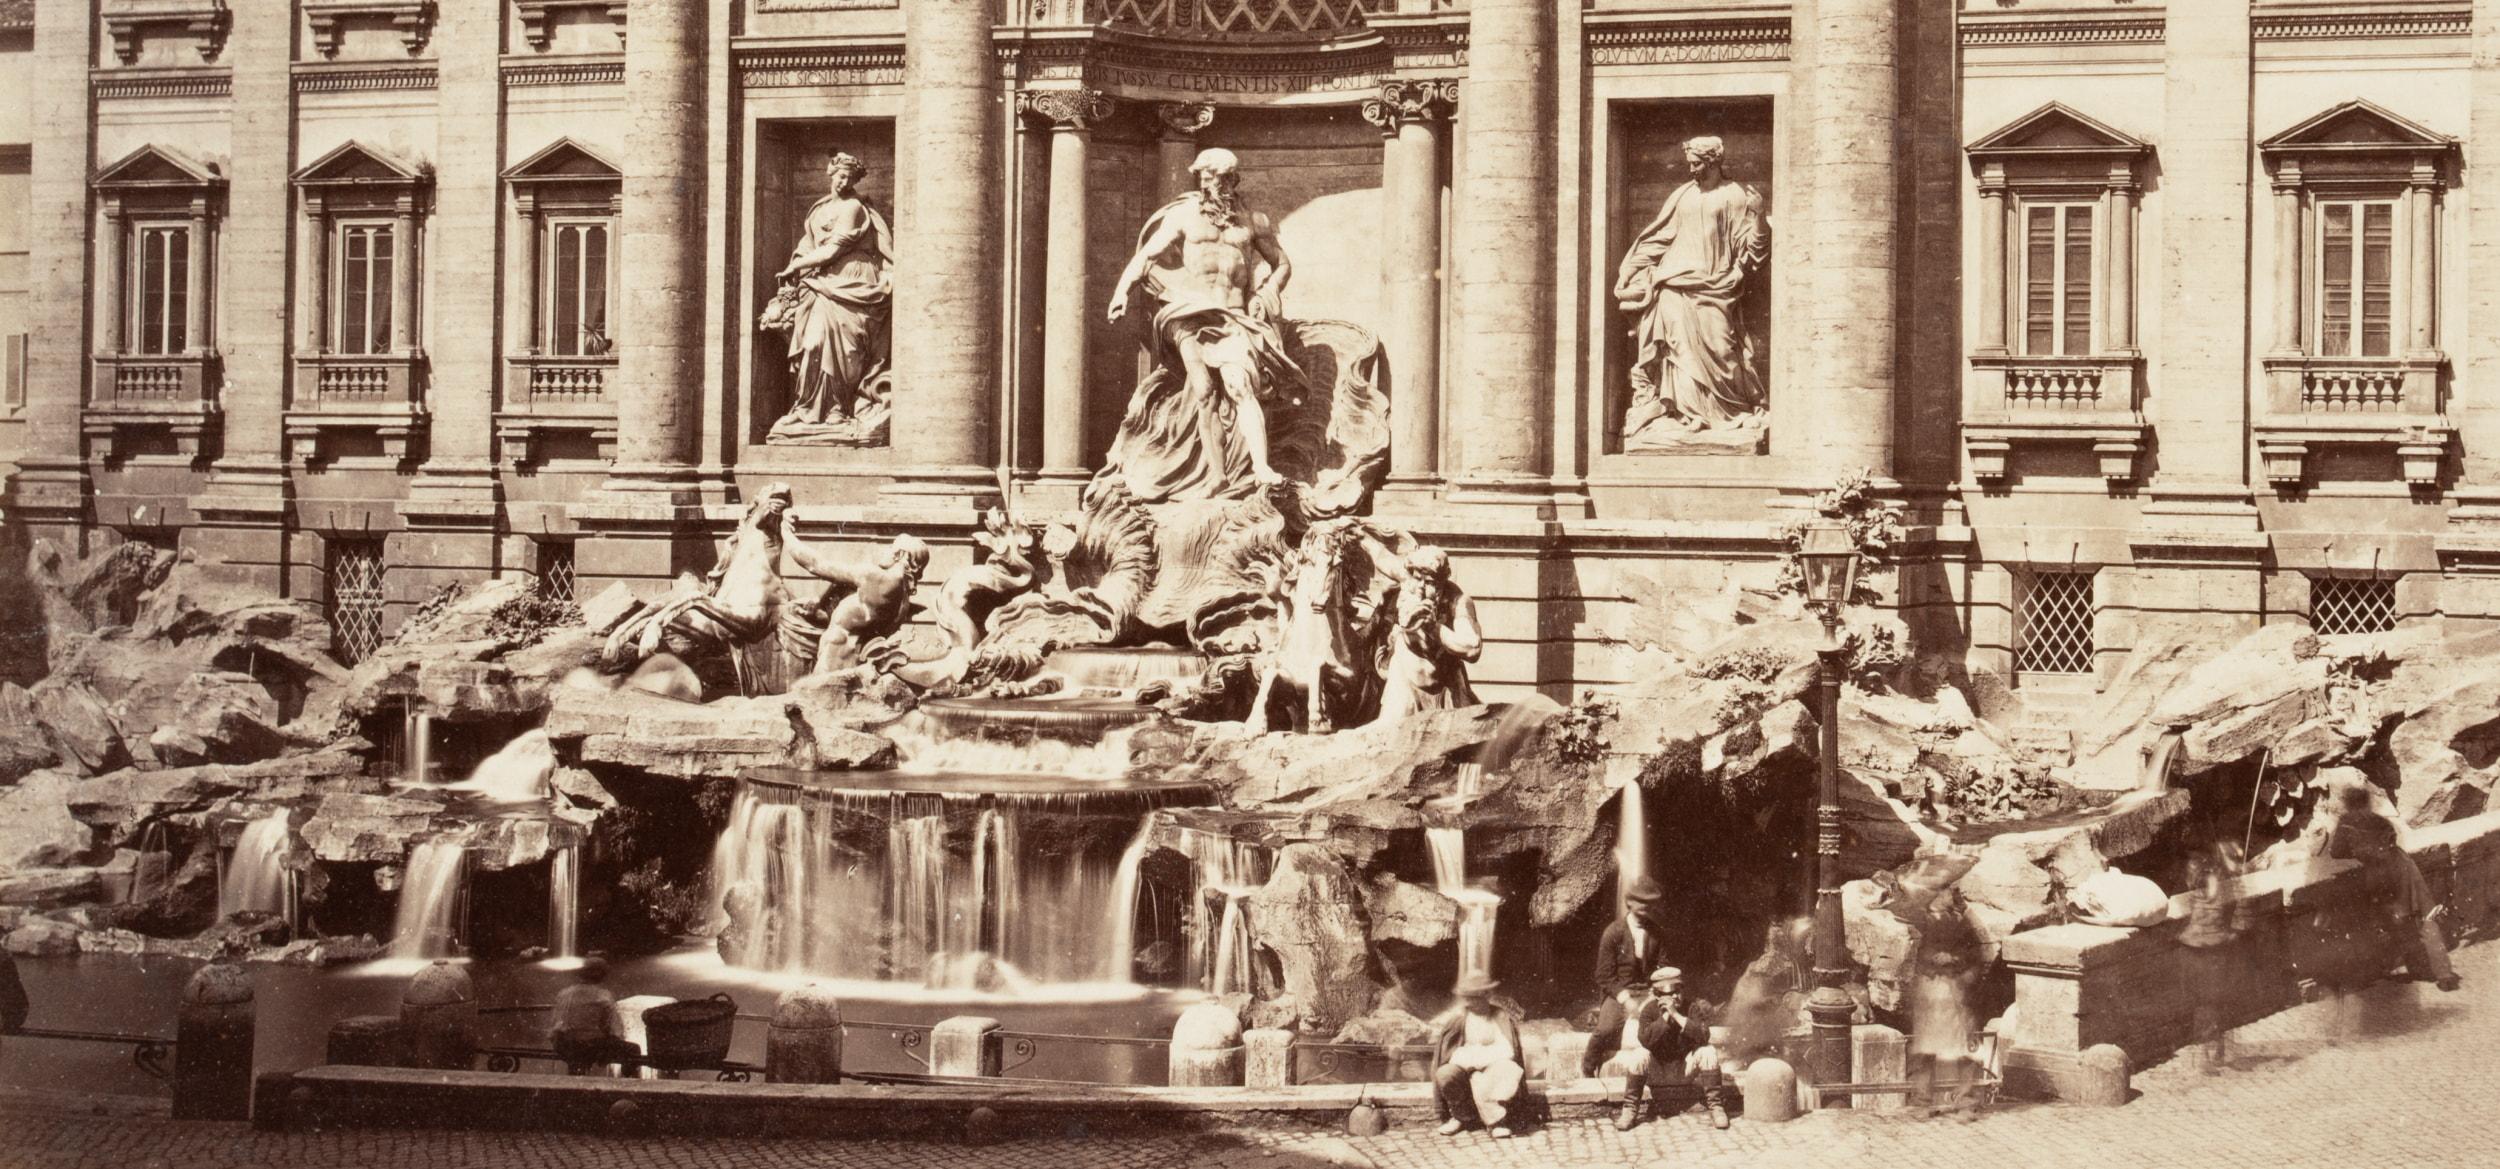 Fratelli Alinari (19th century): Rome, The Trevi Fountain by Nicola Salvi, Early Travel Photography, c. 1880, albumen paper print

Technique: albumen paper print, mounted on Cardboard

Stamp: Lower right Blank stamp, Fratelli Alinari. Florence. 19th